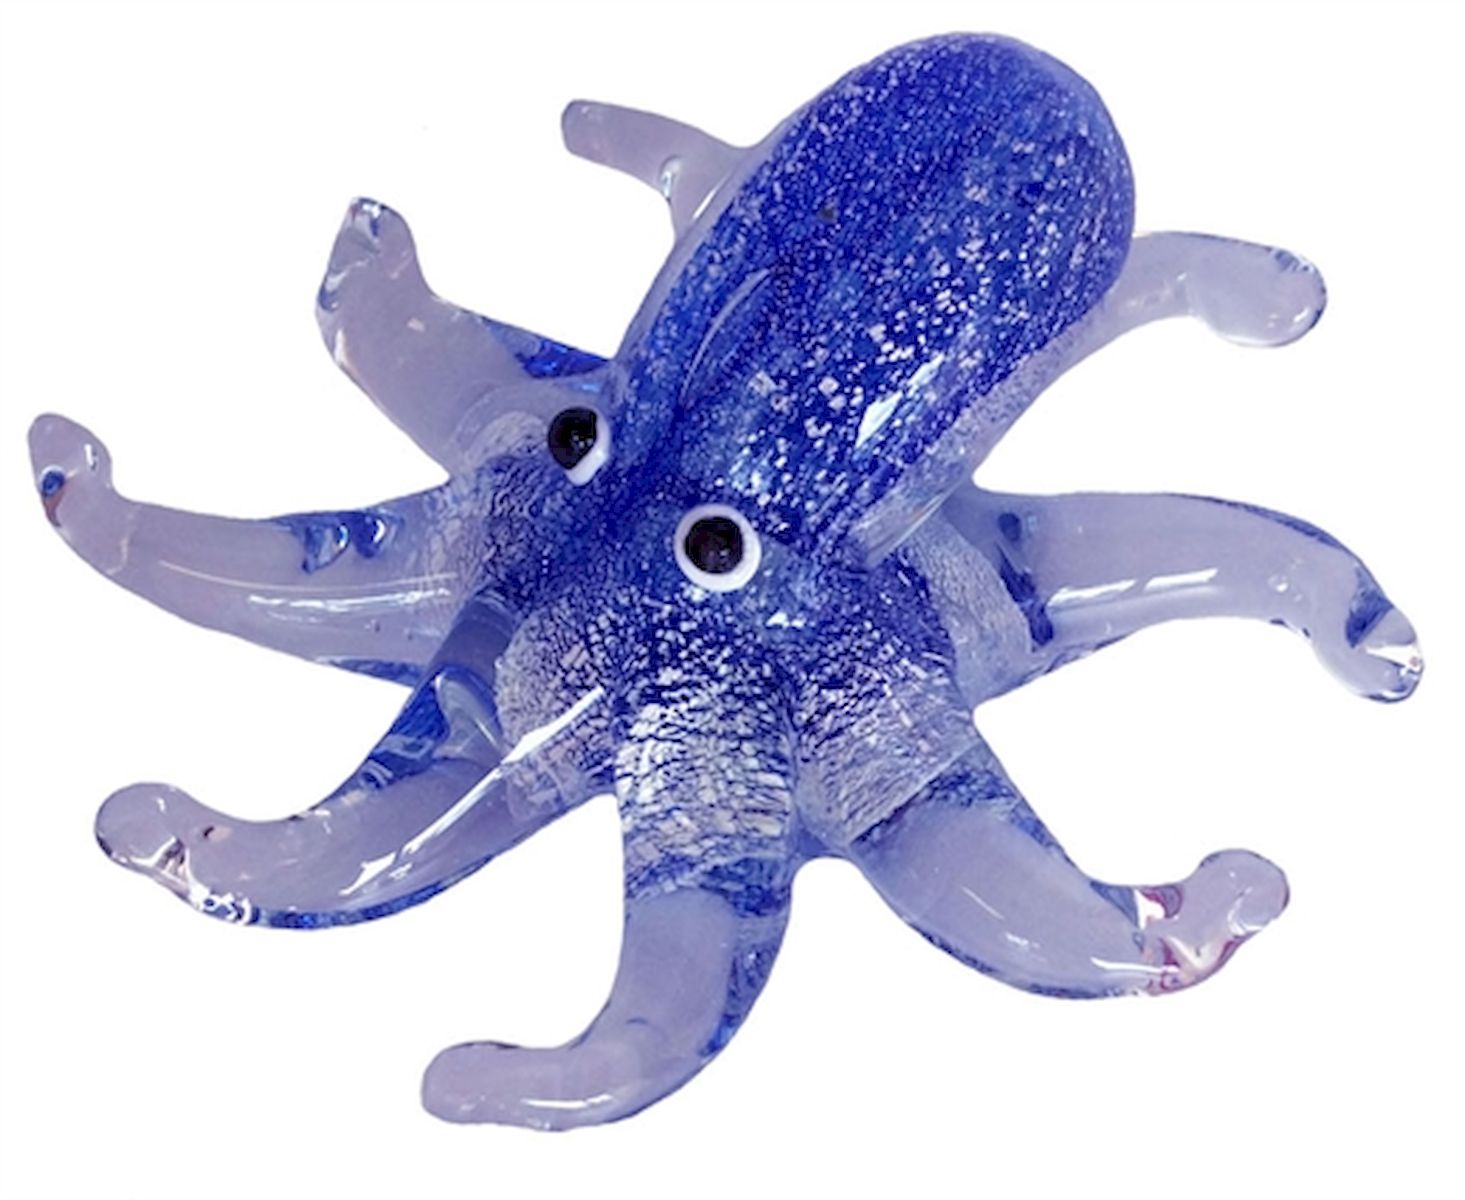 Silver And Blue Glow In The Dark Glass Octopus Paperweight - image 1 of 1